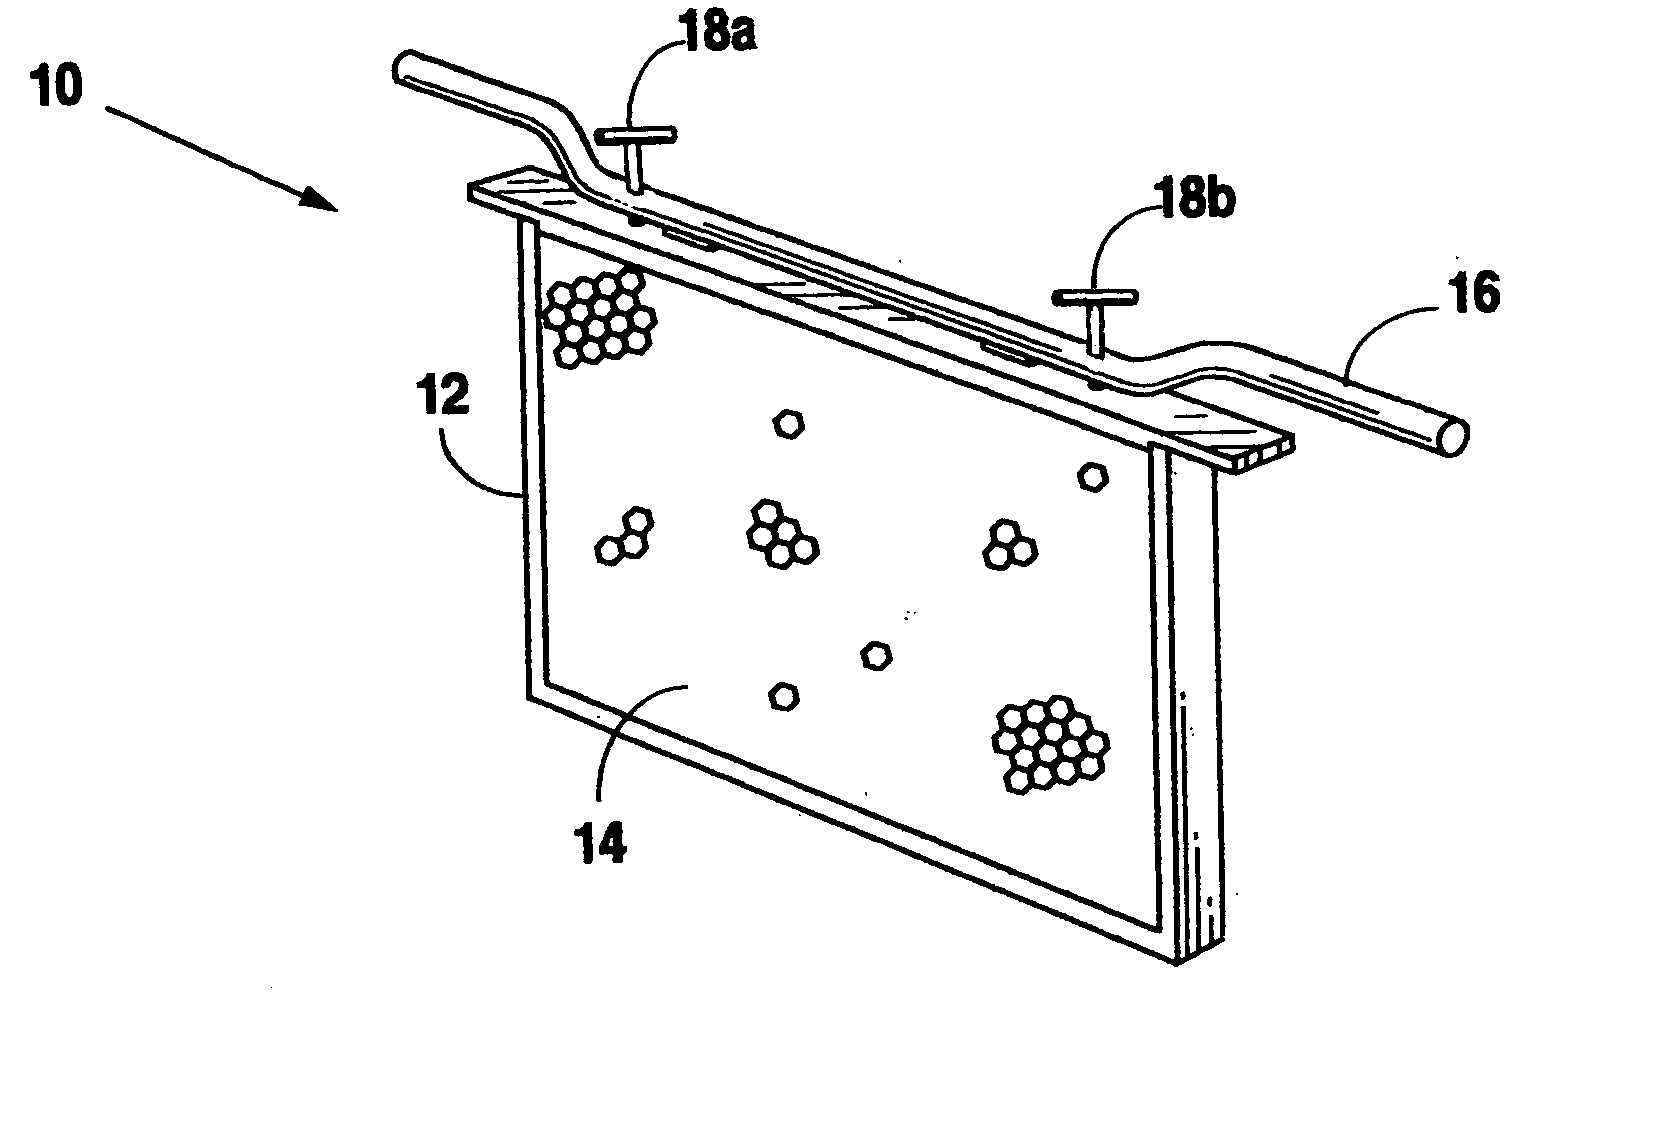 Method and apparatus for the removal and handling of honey frames from beehive boxes